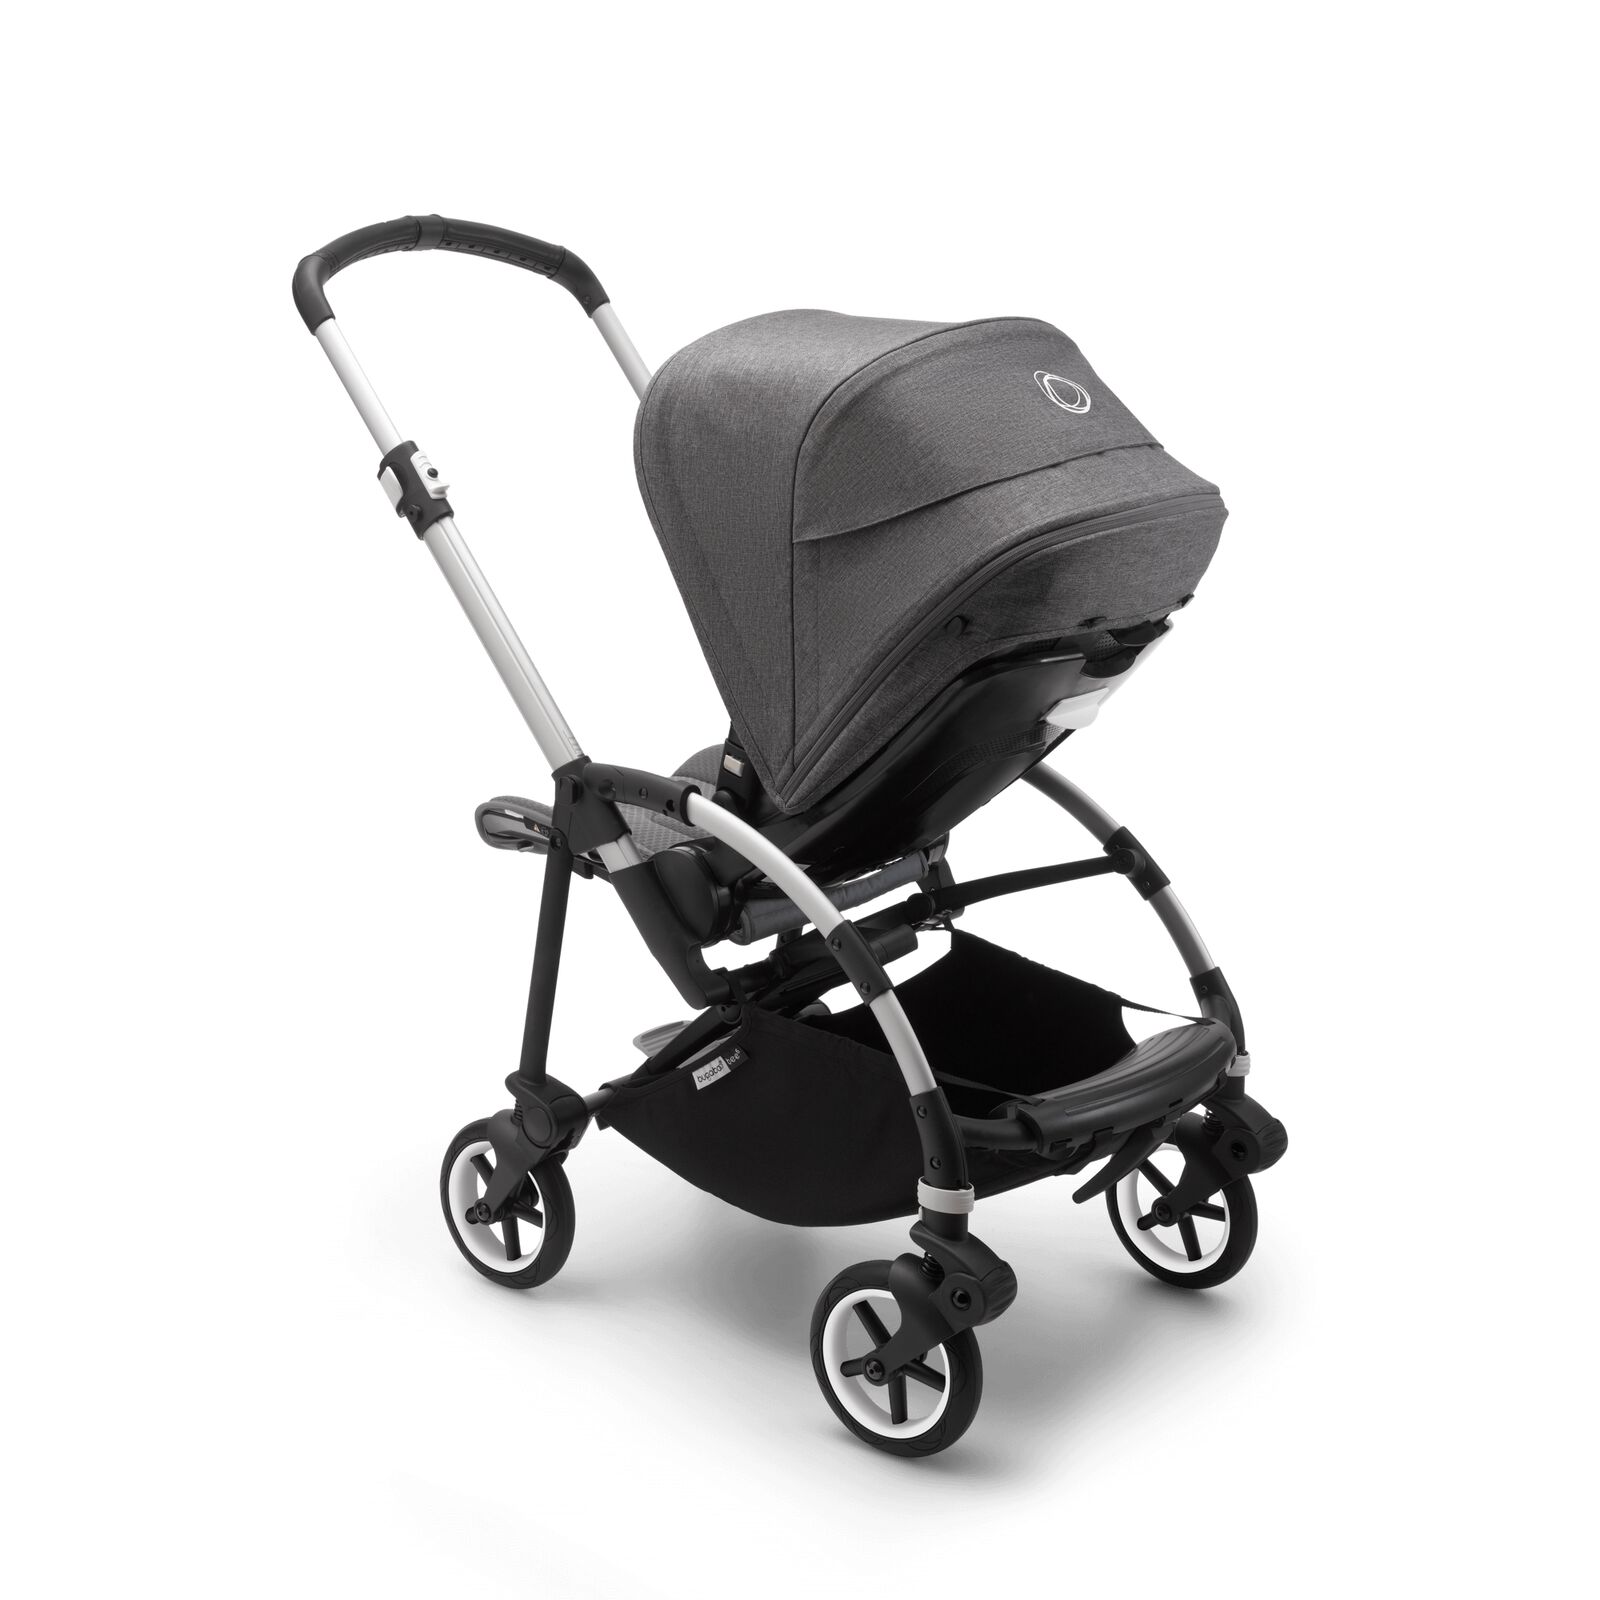 Bugaboo Bee 6 seat and bassinet stroller - View 2